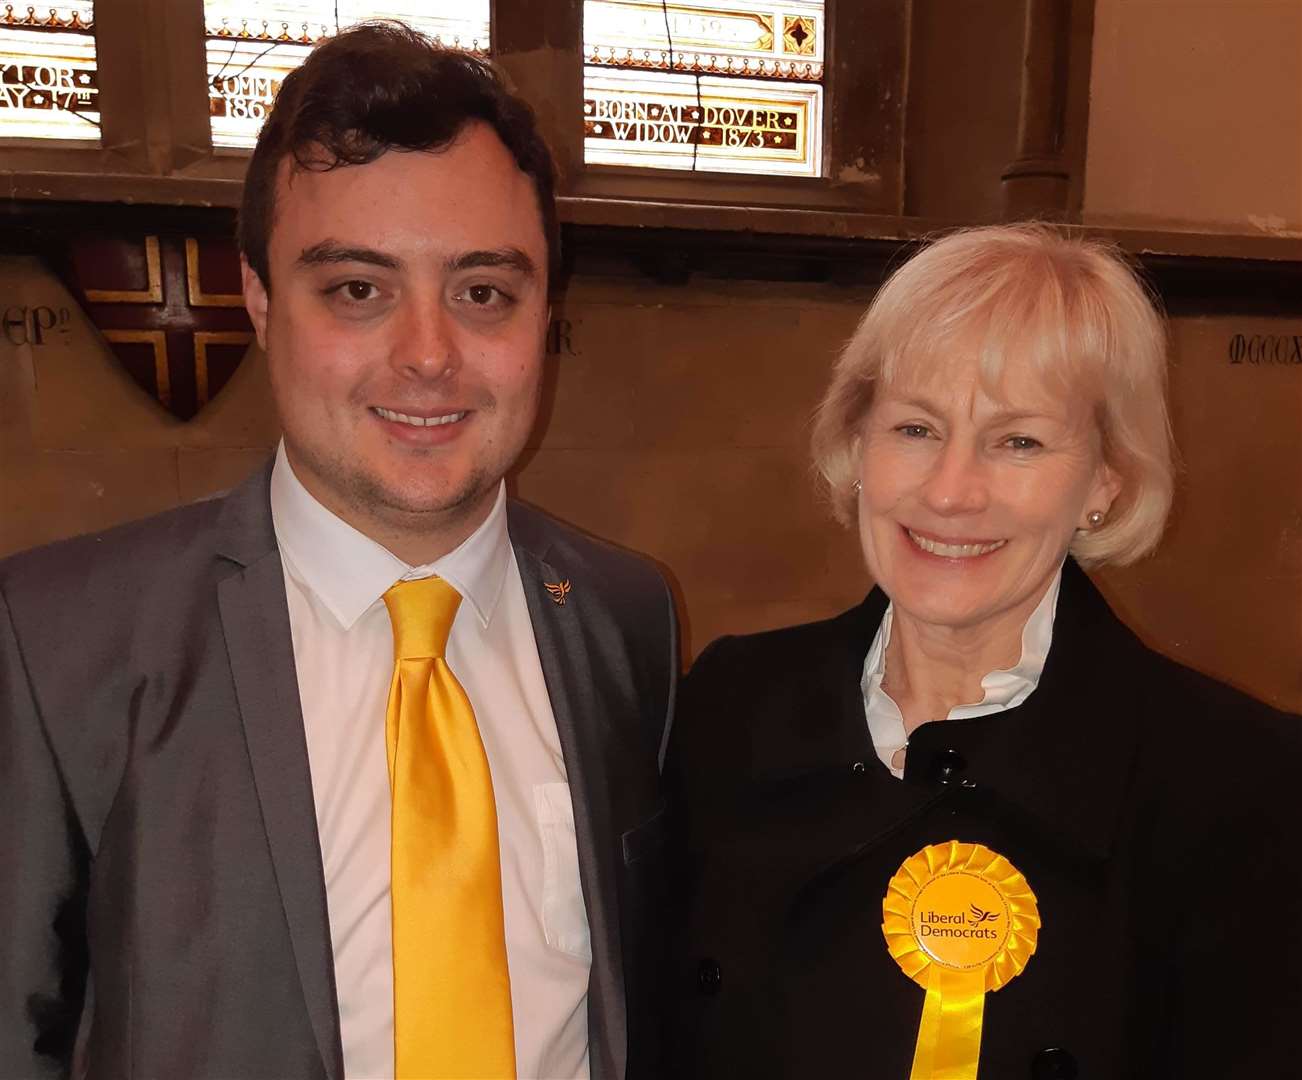 Liberal Democrats Aston Mannerings and Penelope James